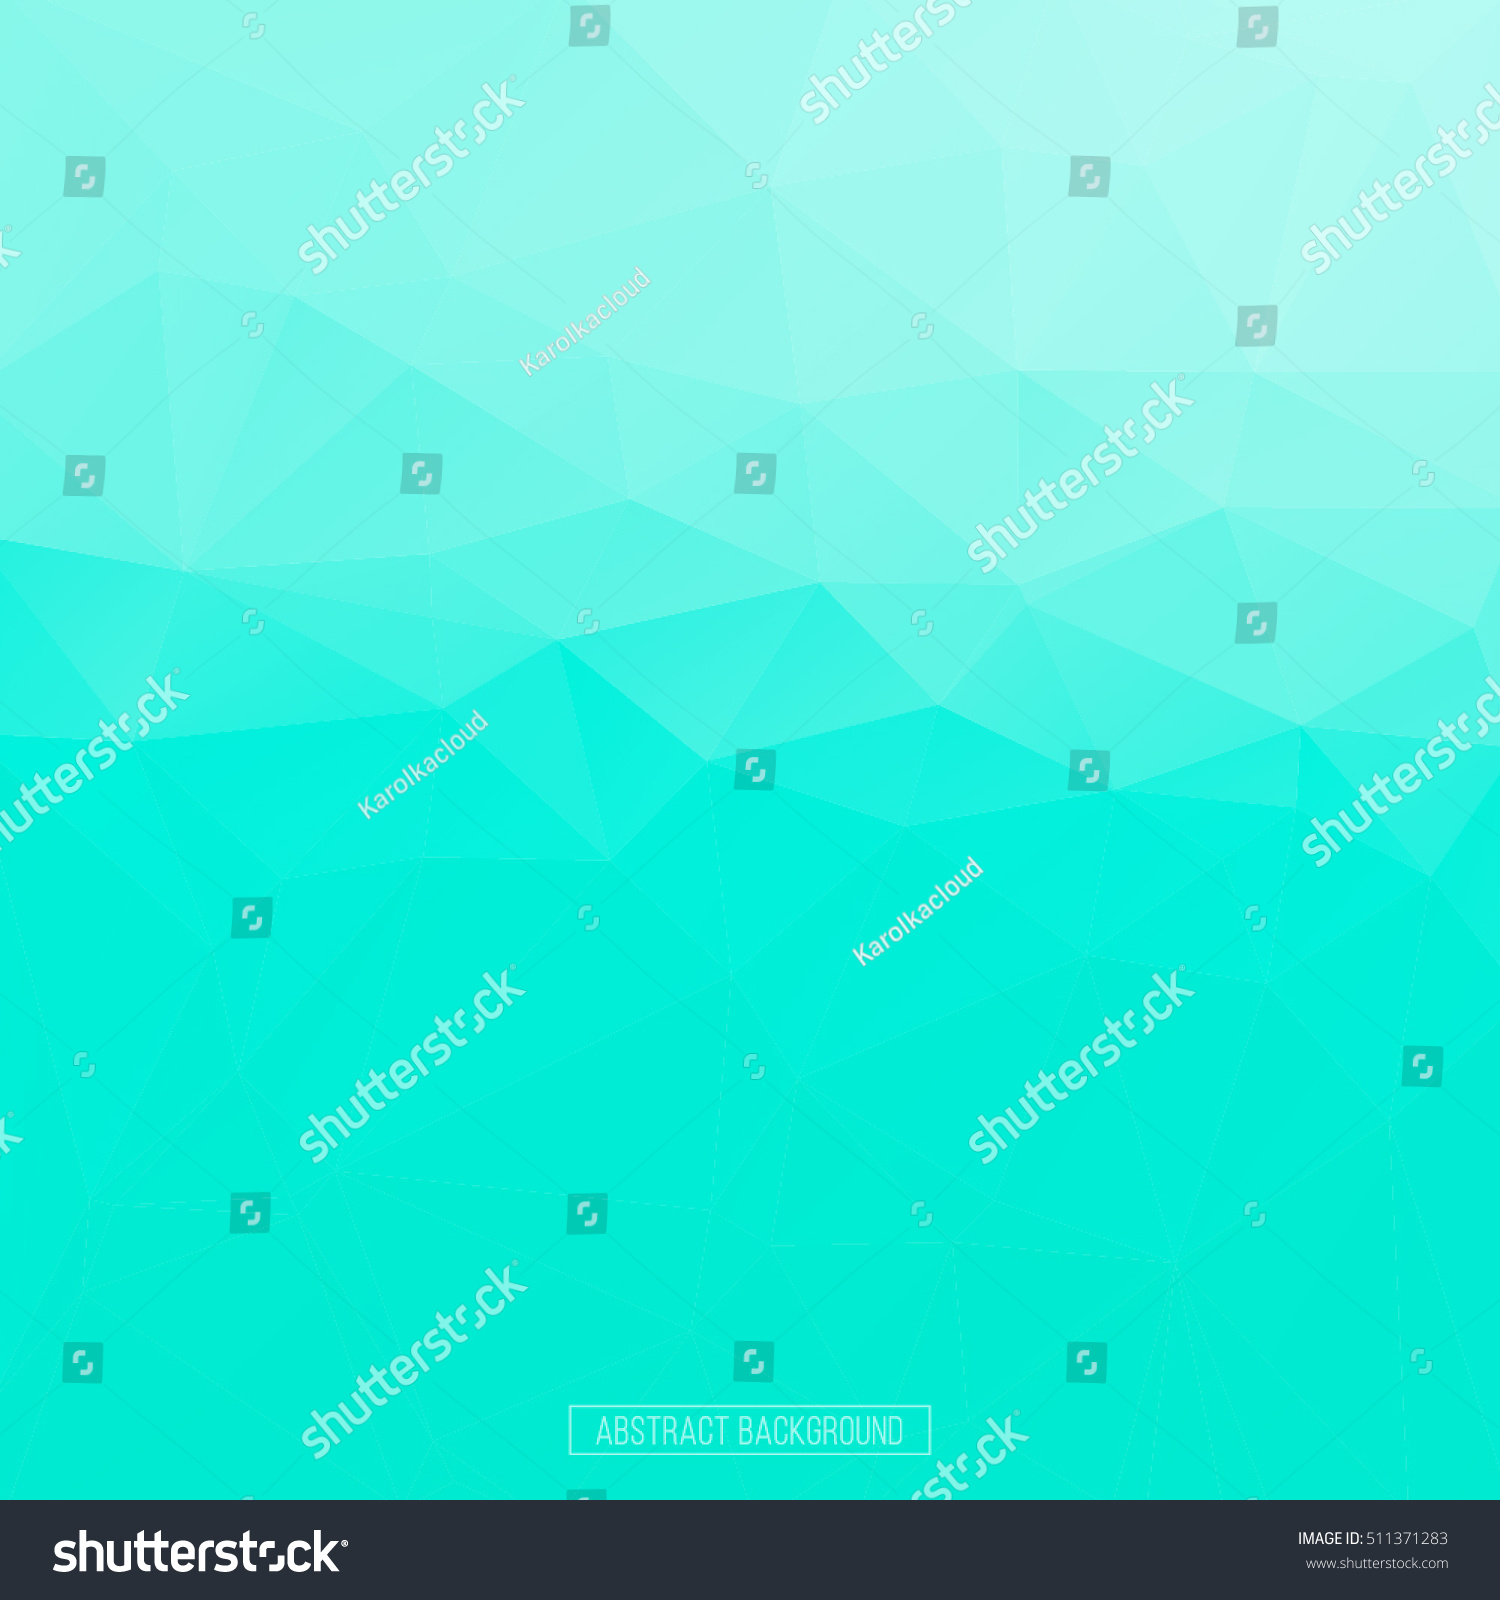 Abstract Blue Polygonal Mosaic Background Stock Vector 511371283 ...